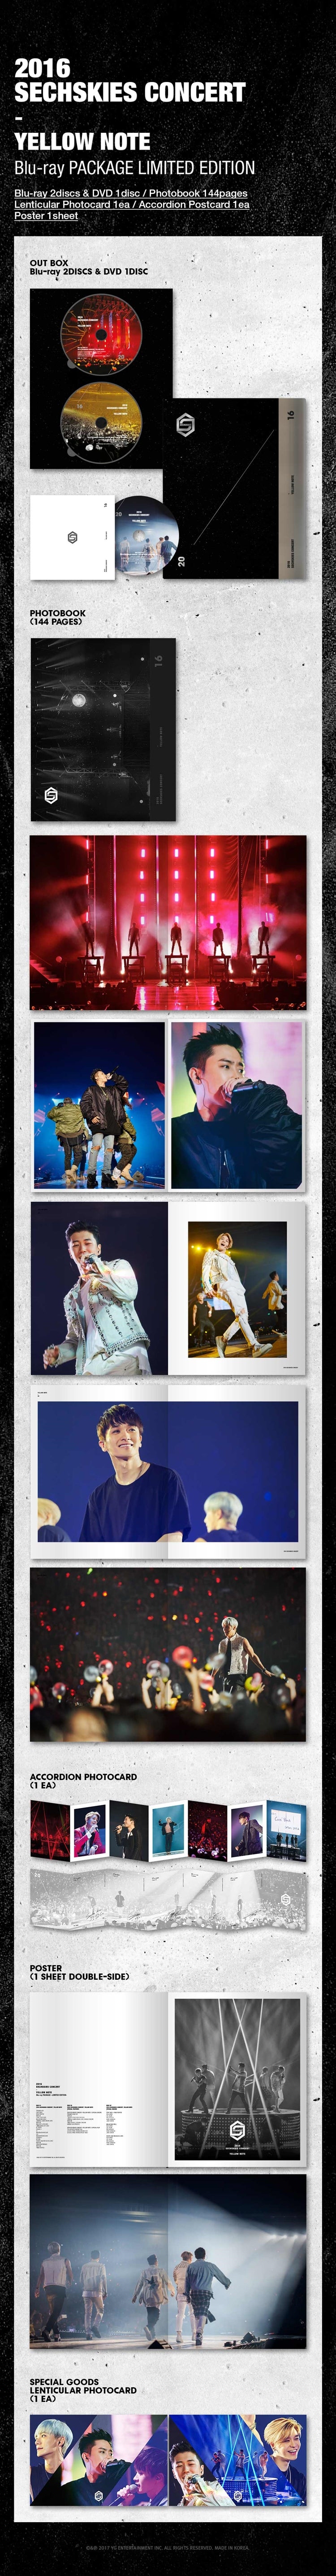 SECHSKIES - [YELLOW NOTE] (2016 SECHSKIES CONCERT Live DVD Package